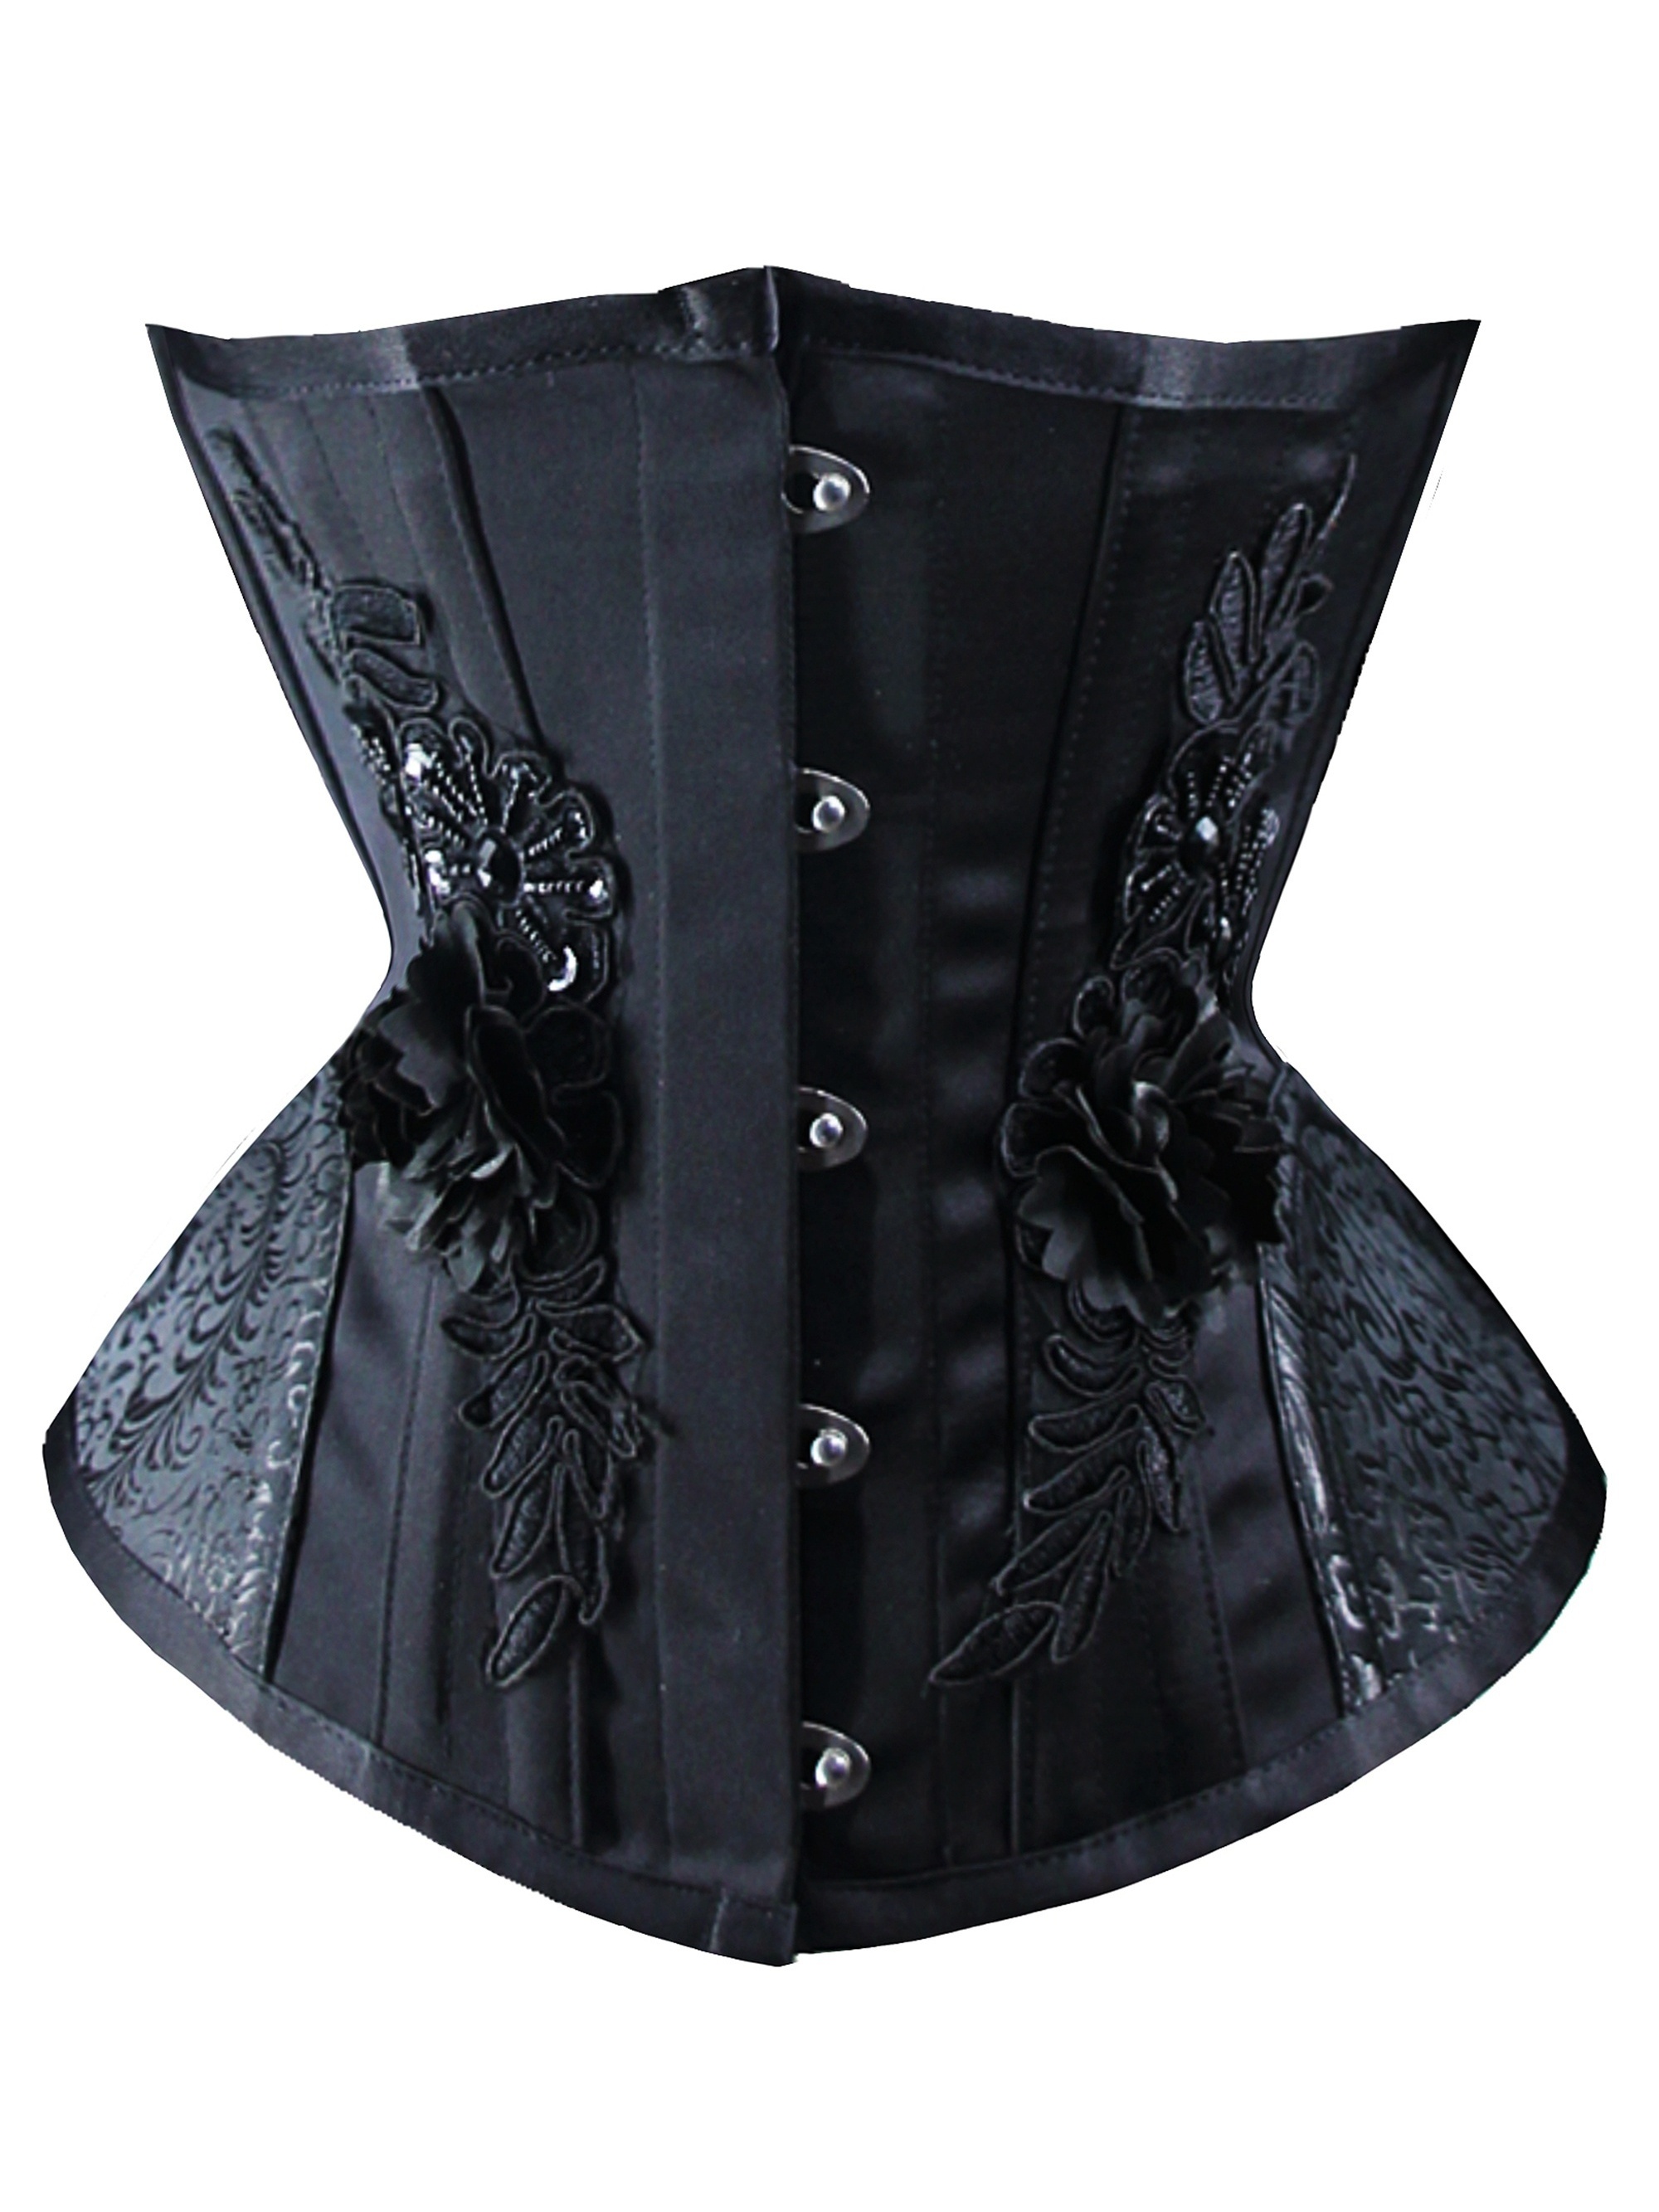 Stunning Brocade Corset Top, Slimming Sweetheart Bust Baroque Style Corset  With Lace Up & Zip Detail, Women's Clothing